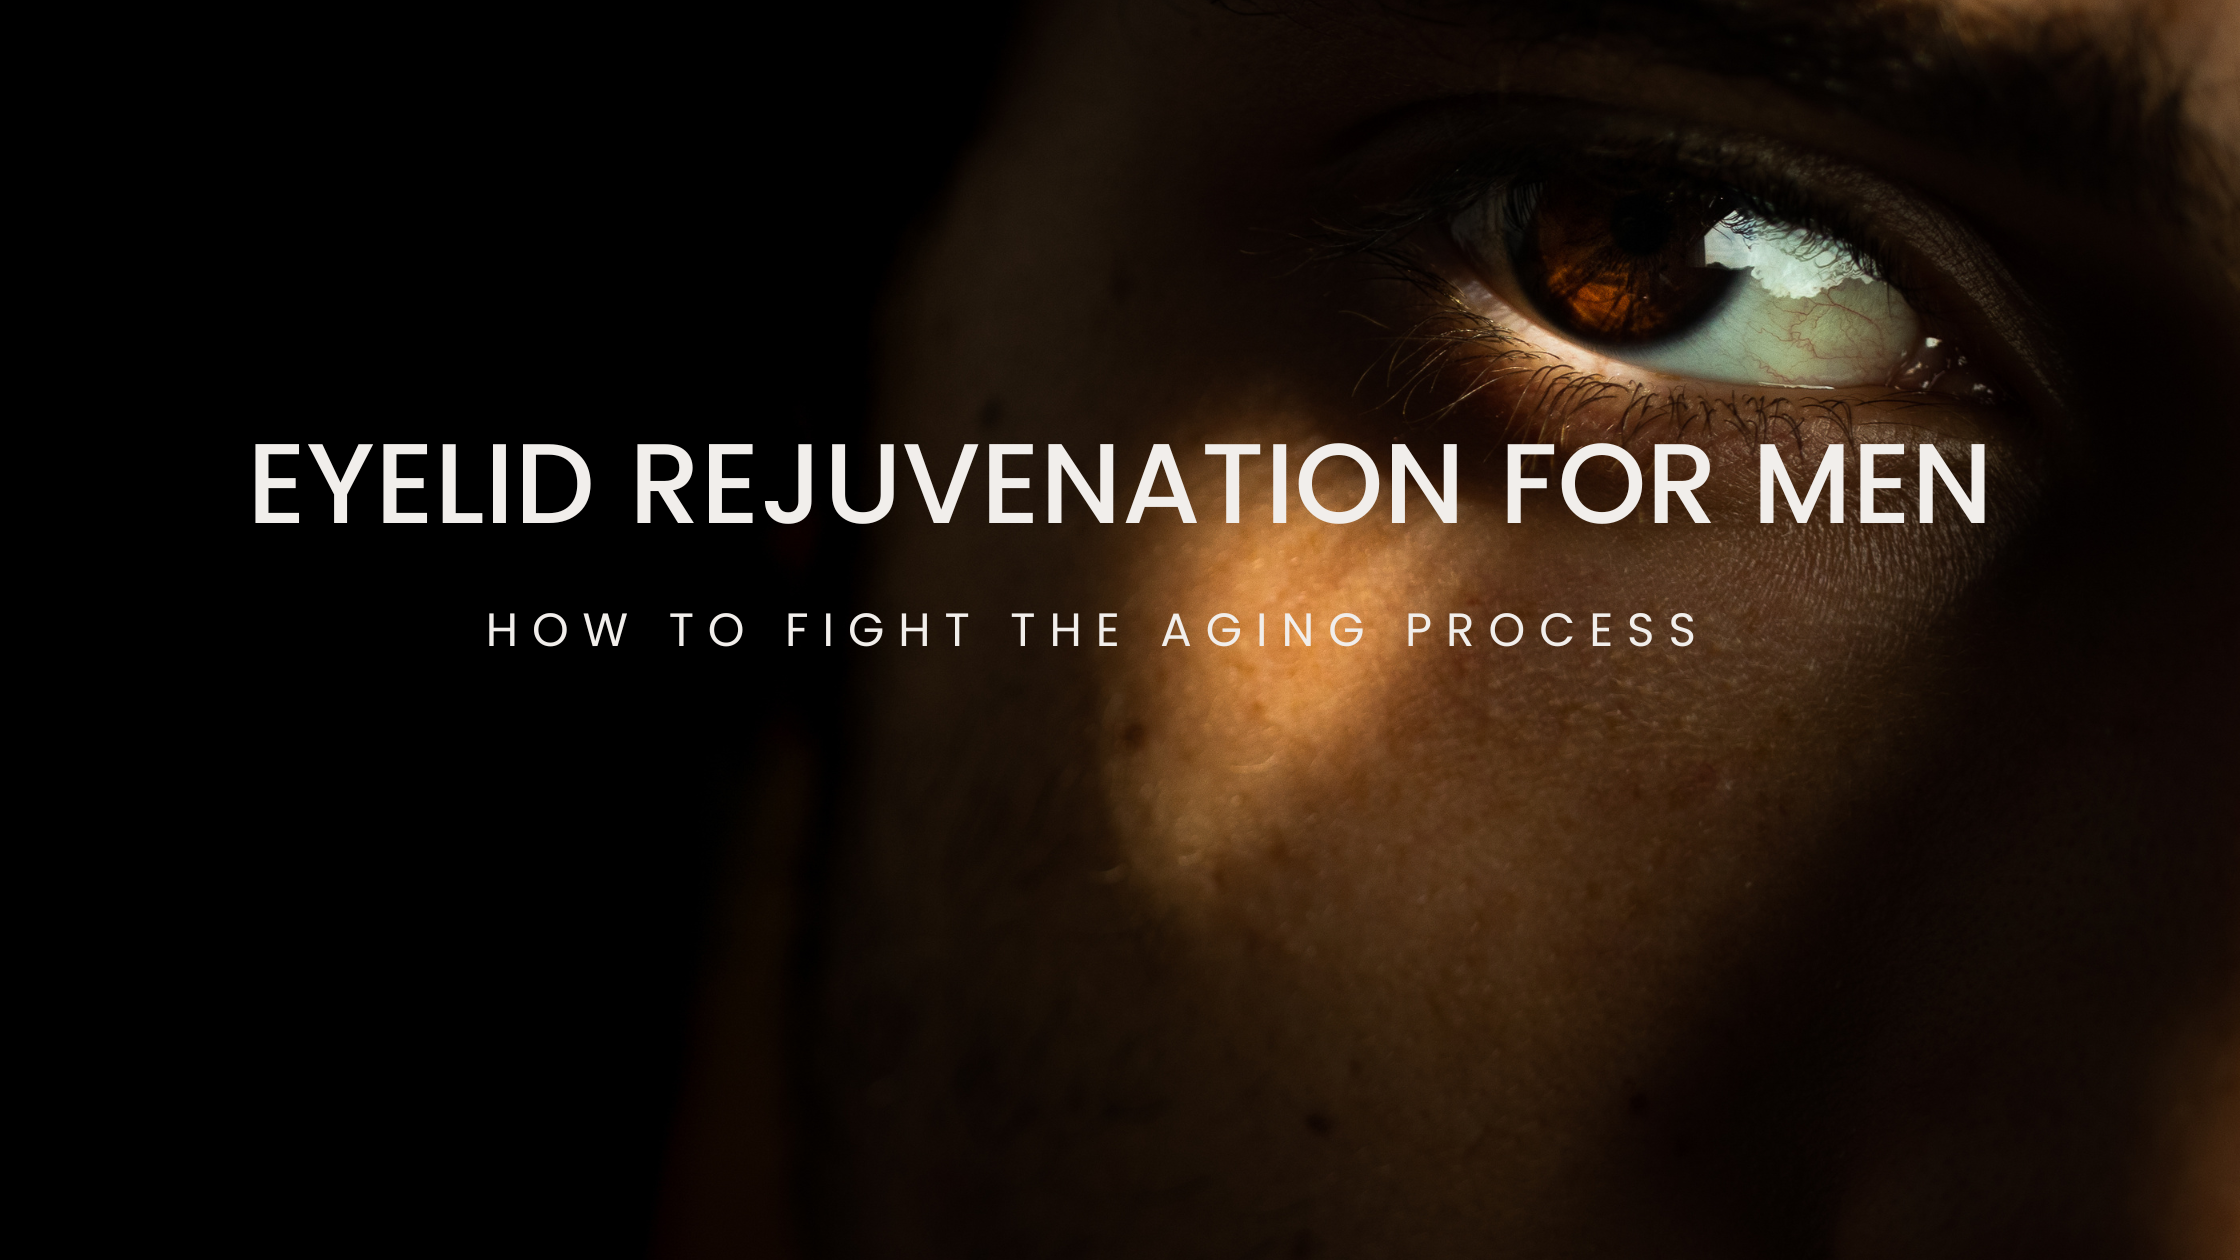 Eyelid Rejuvenation for Men: How to Fight the Aging Process